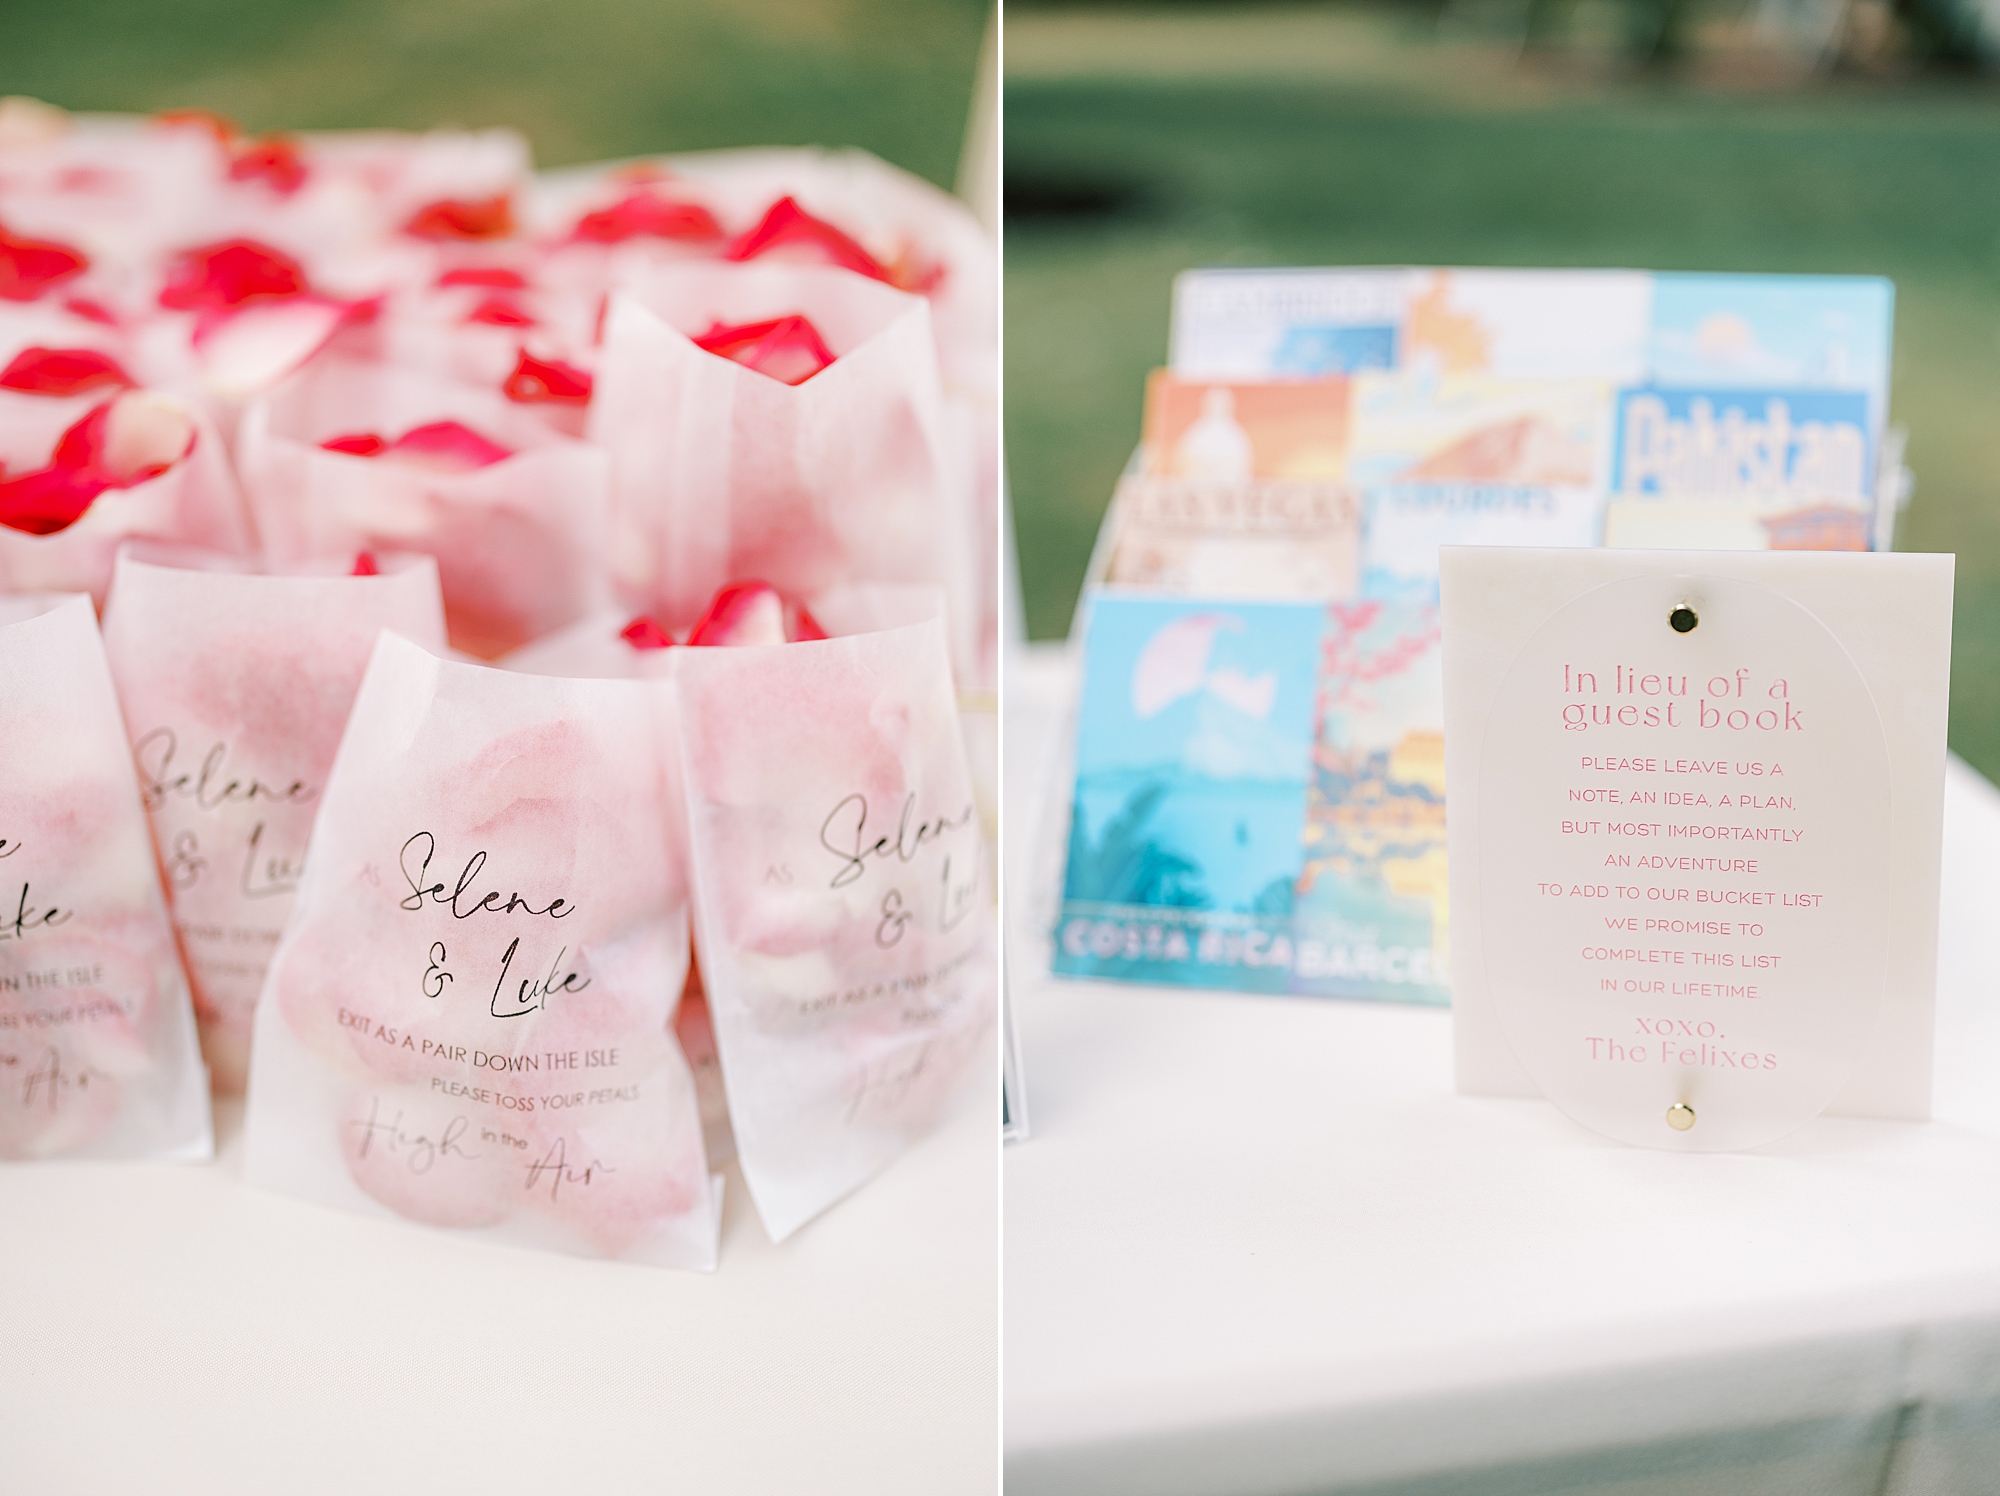 bags of petals for wedding ceremony 